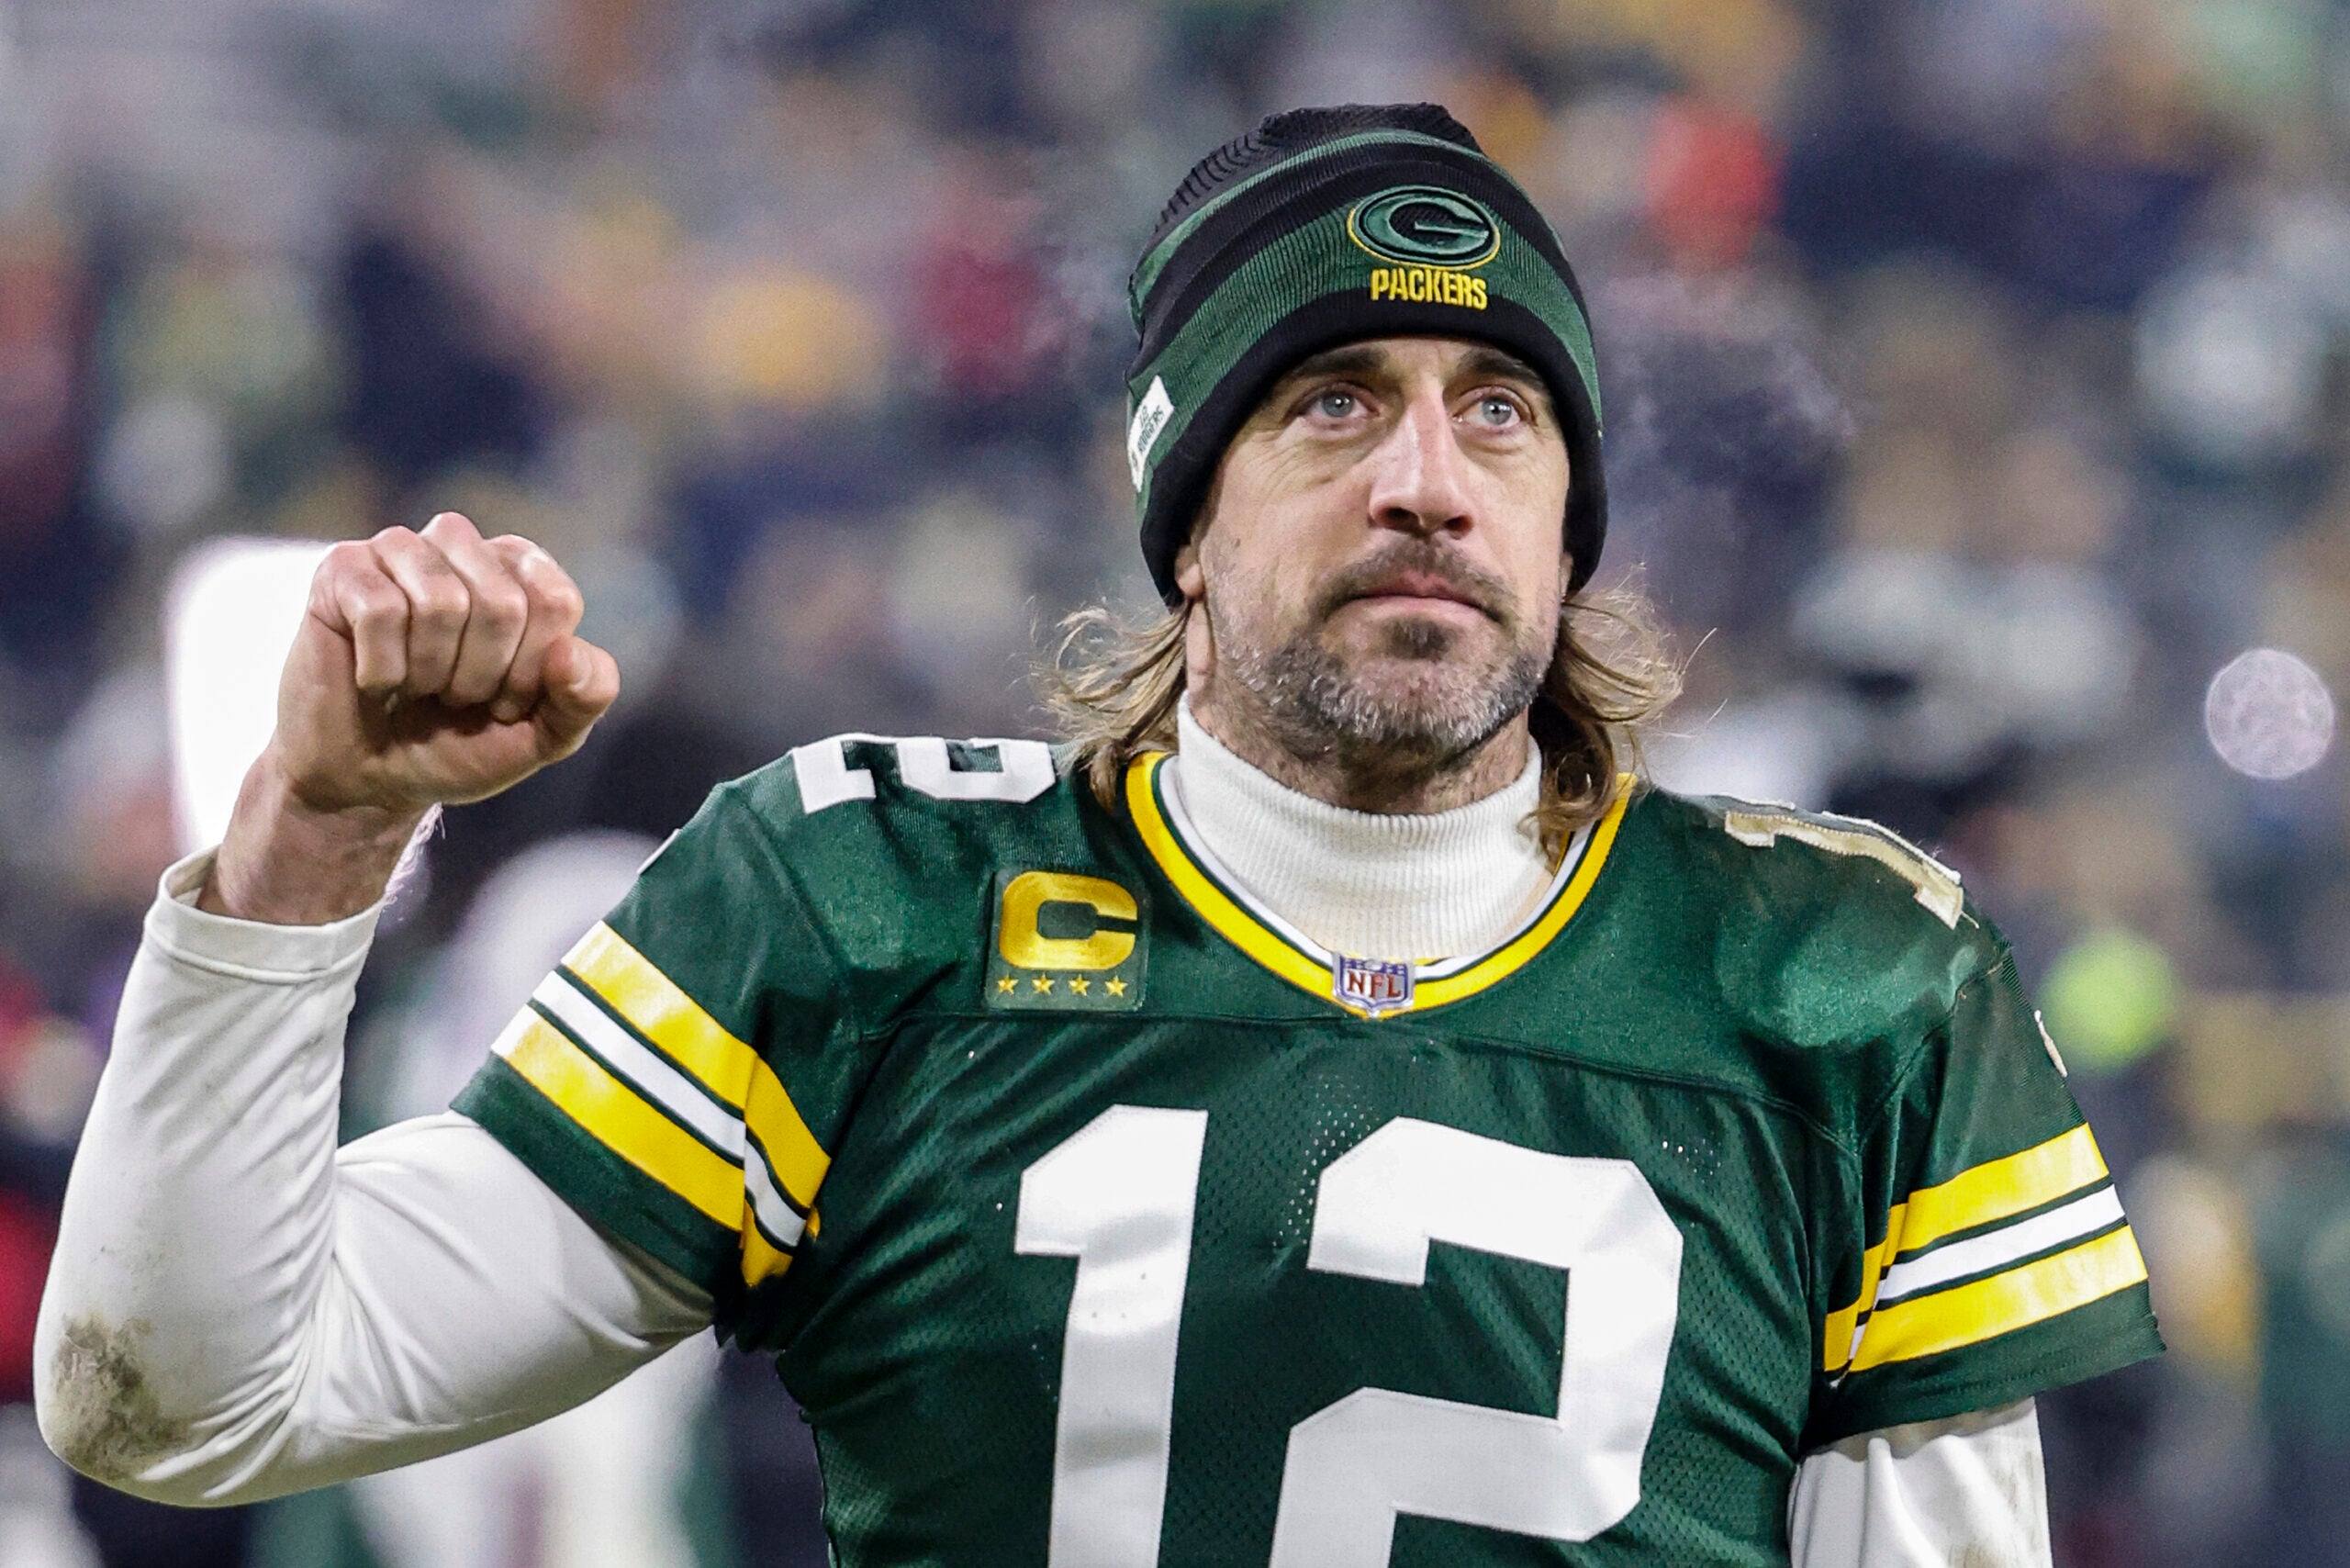 Packers quarterback Aaron Rodgers.